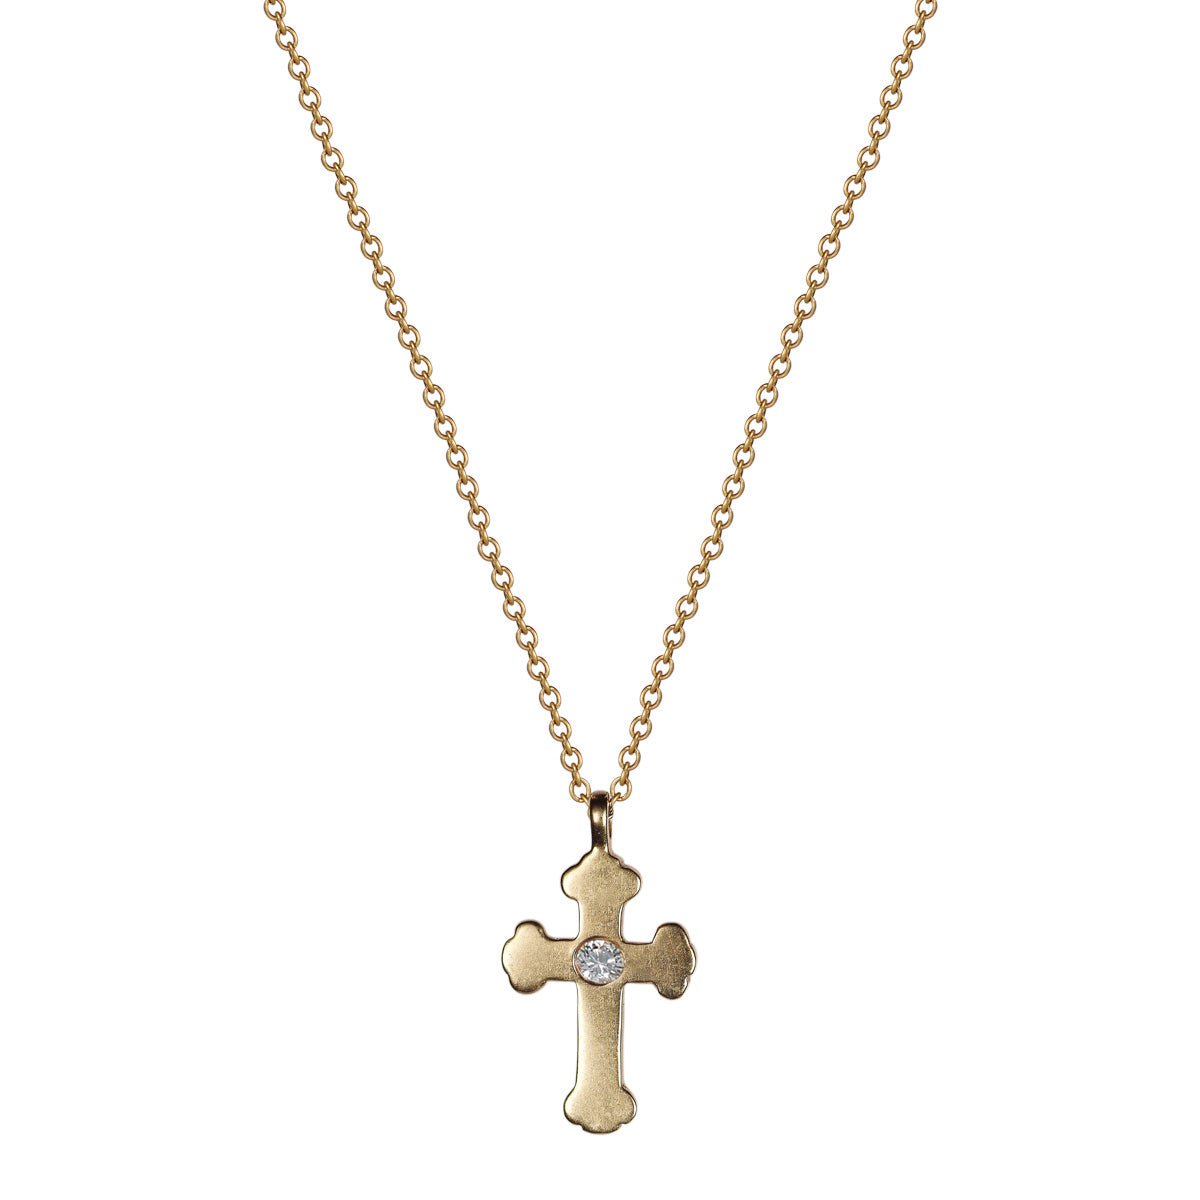 Sold at Auction: Italian 10K Gold Rosary Necklace w/ Cross